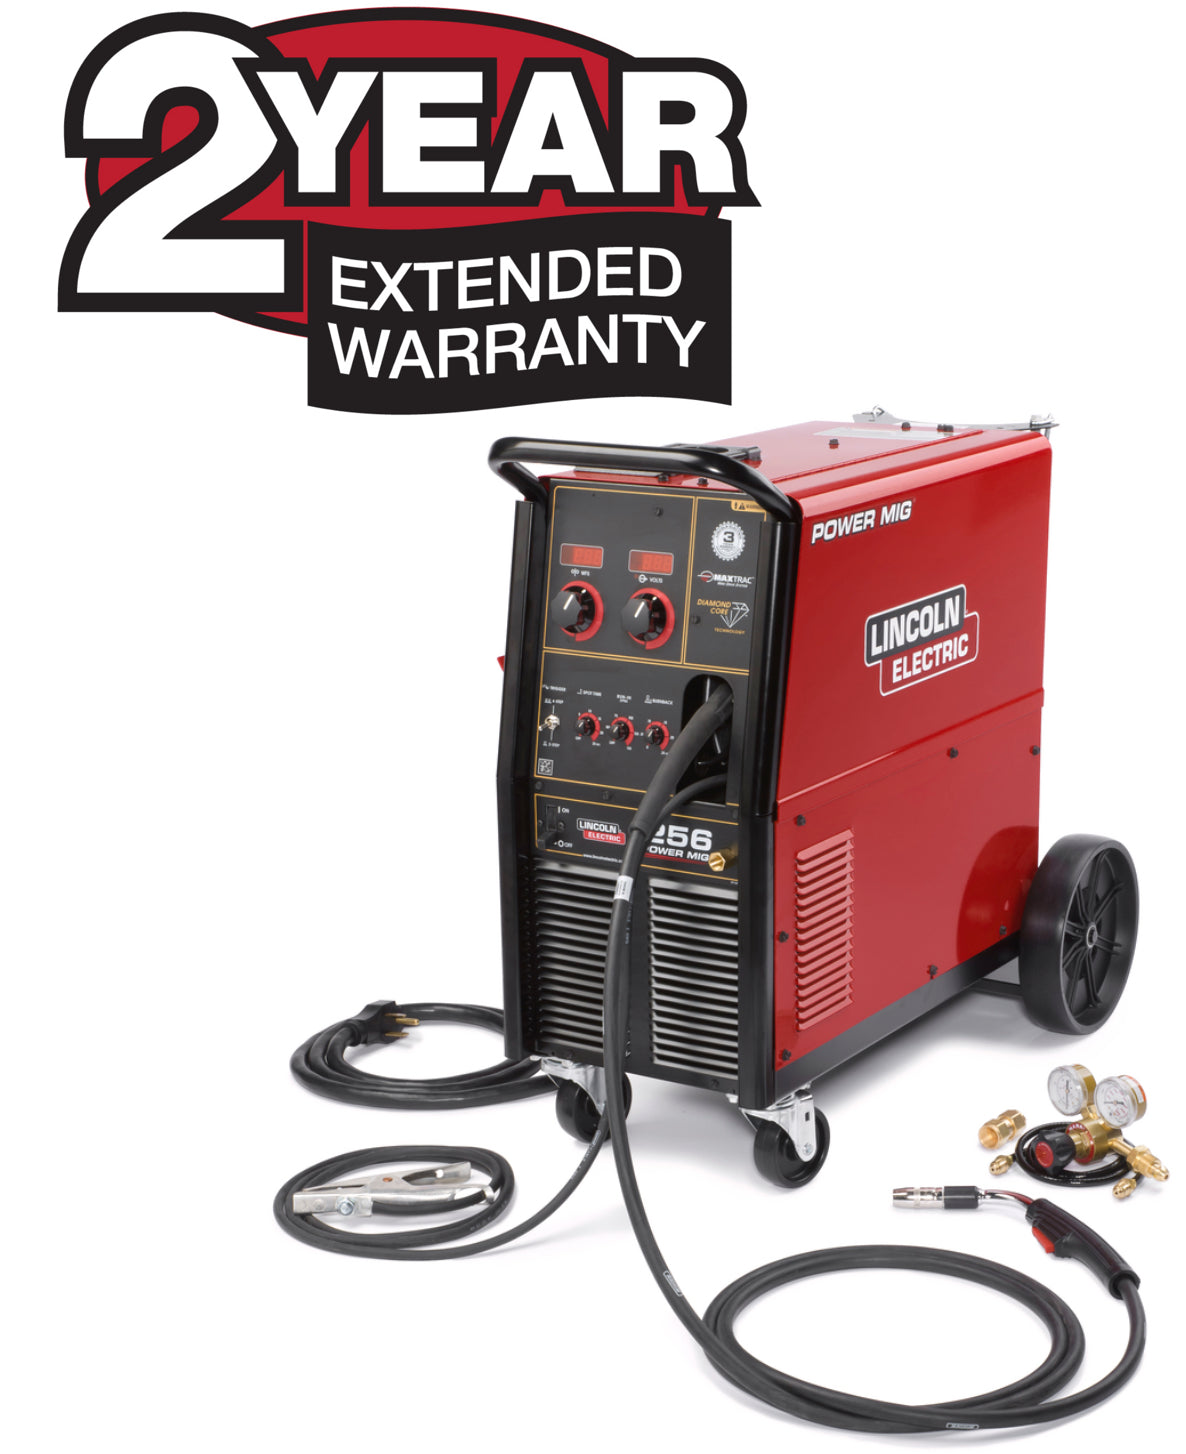 Lincoln 2-Year Extended Warranty - POWER MIG 256 X3068